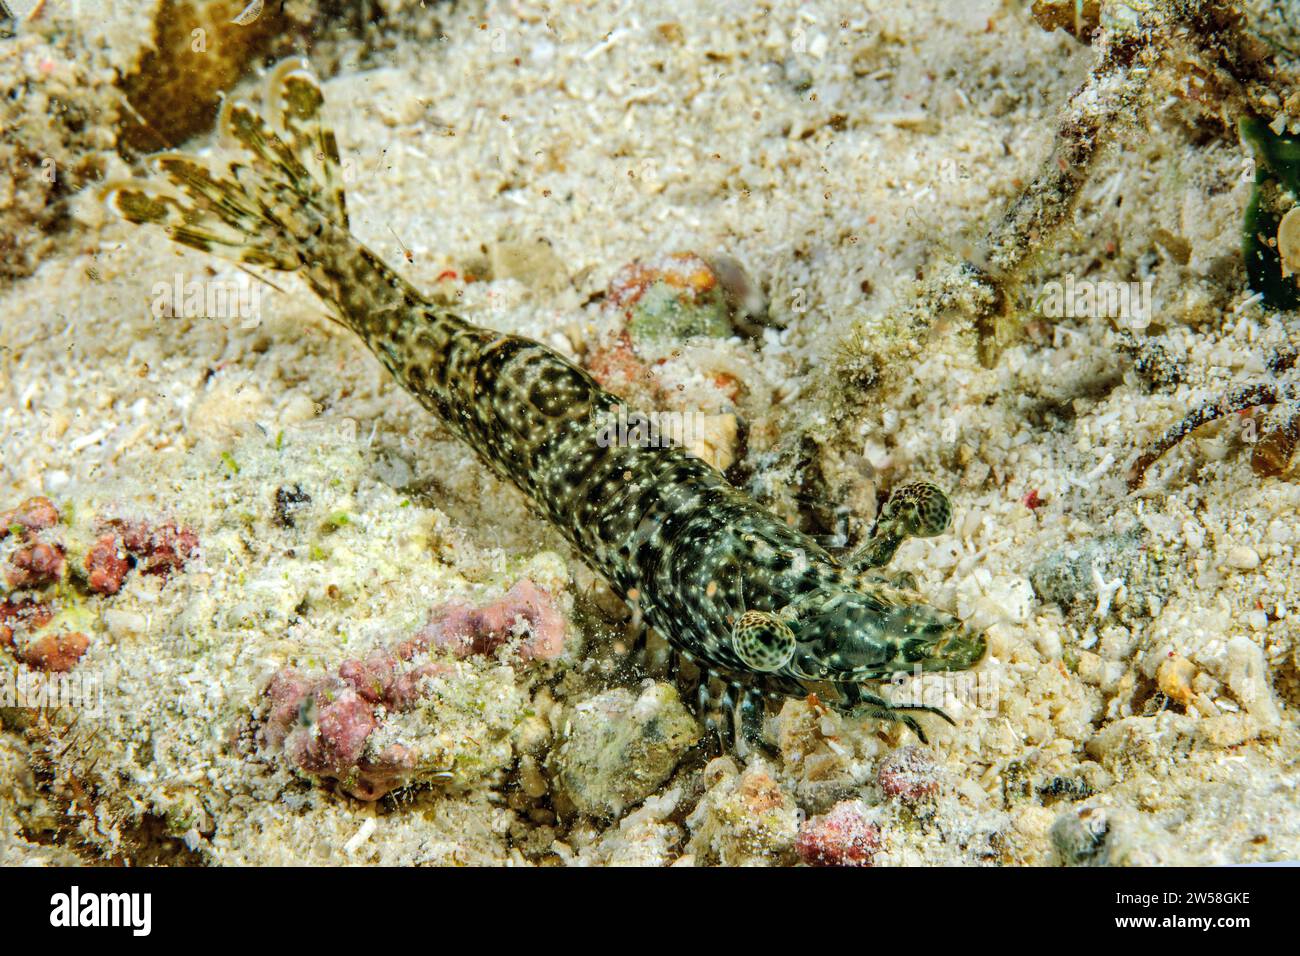 Close-up of marbled shrimp (Saron marmoratus) with marbled stalk eyes distinctive eyes lurking for prey on sandy seabed sandy bottom, Indo-Pacific Stock Photo